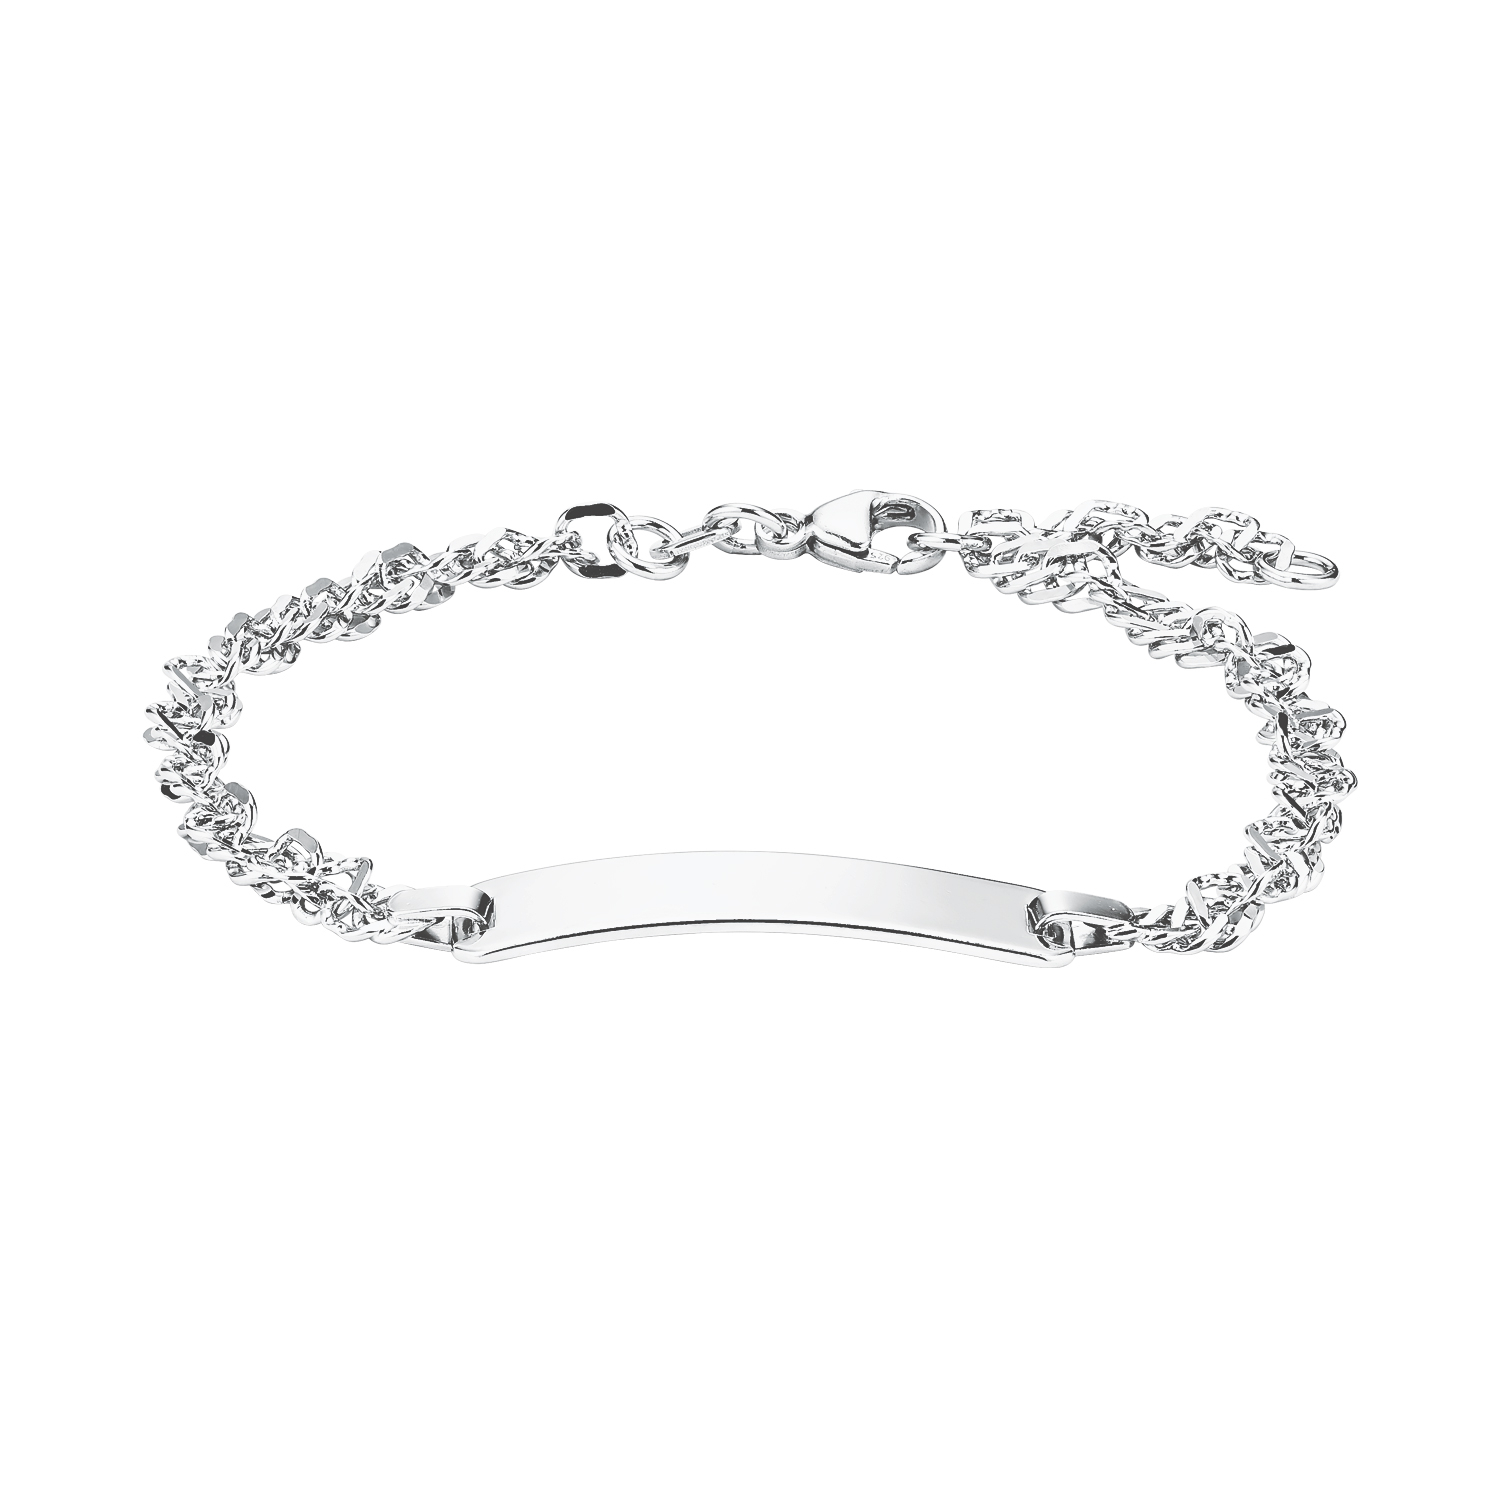 Armband Unisex, Sterling Silber 925